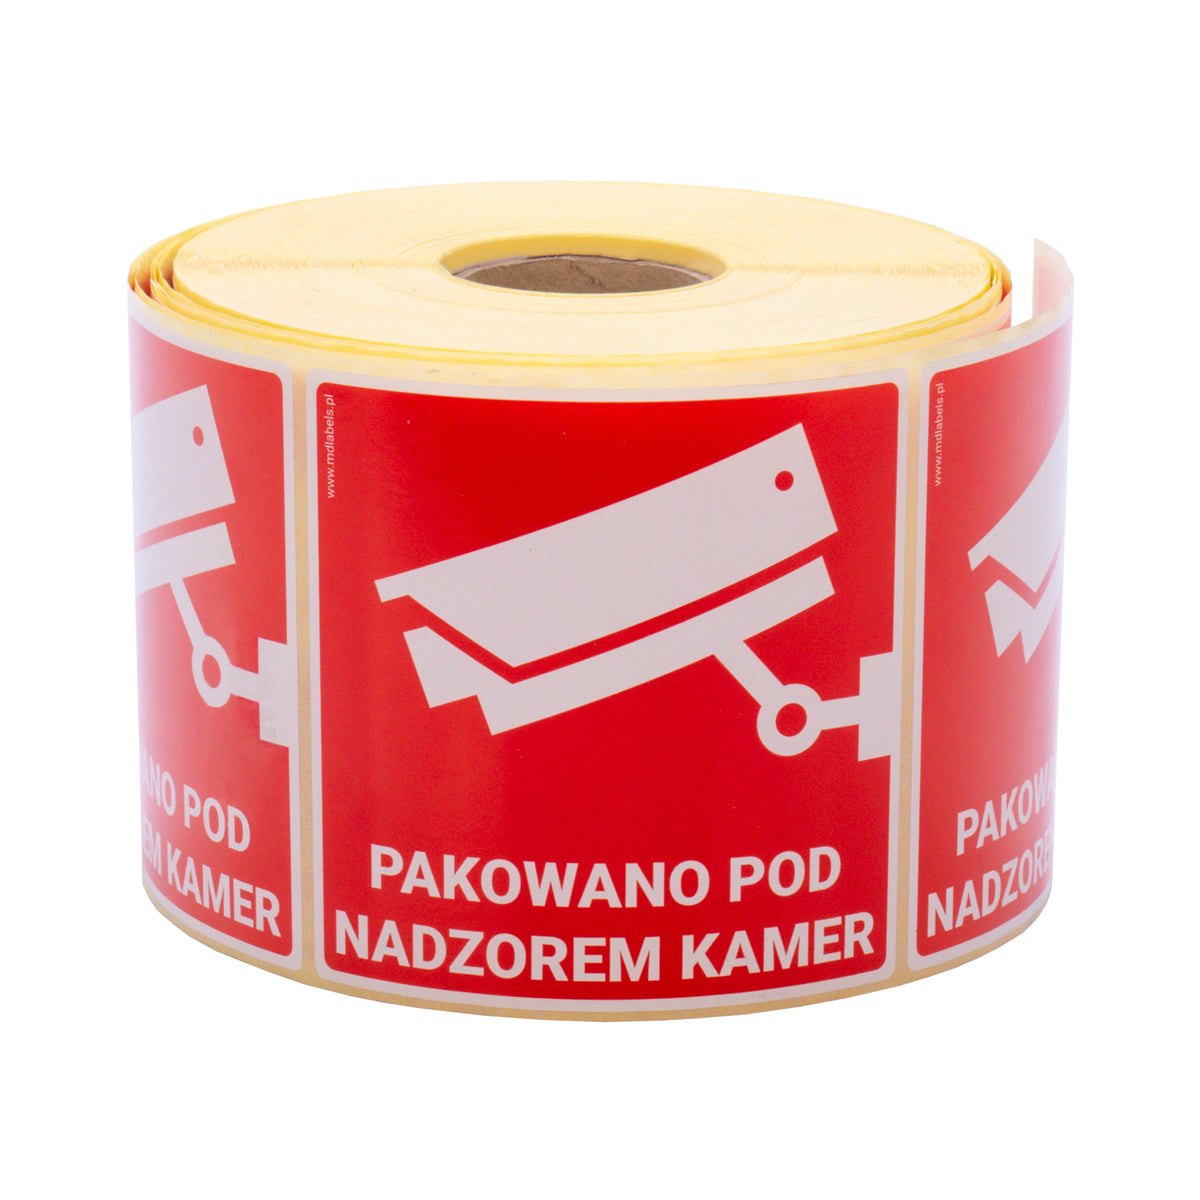 Self-adhesive warning labels - Packaged under camera surveillance! - 98x98mm 1000 per roll